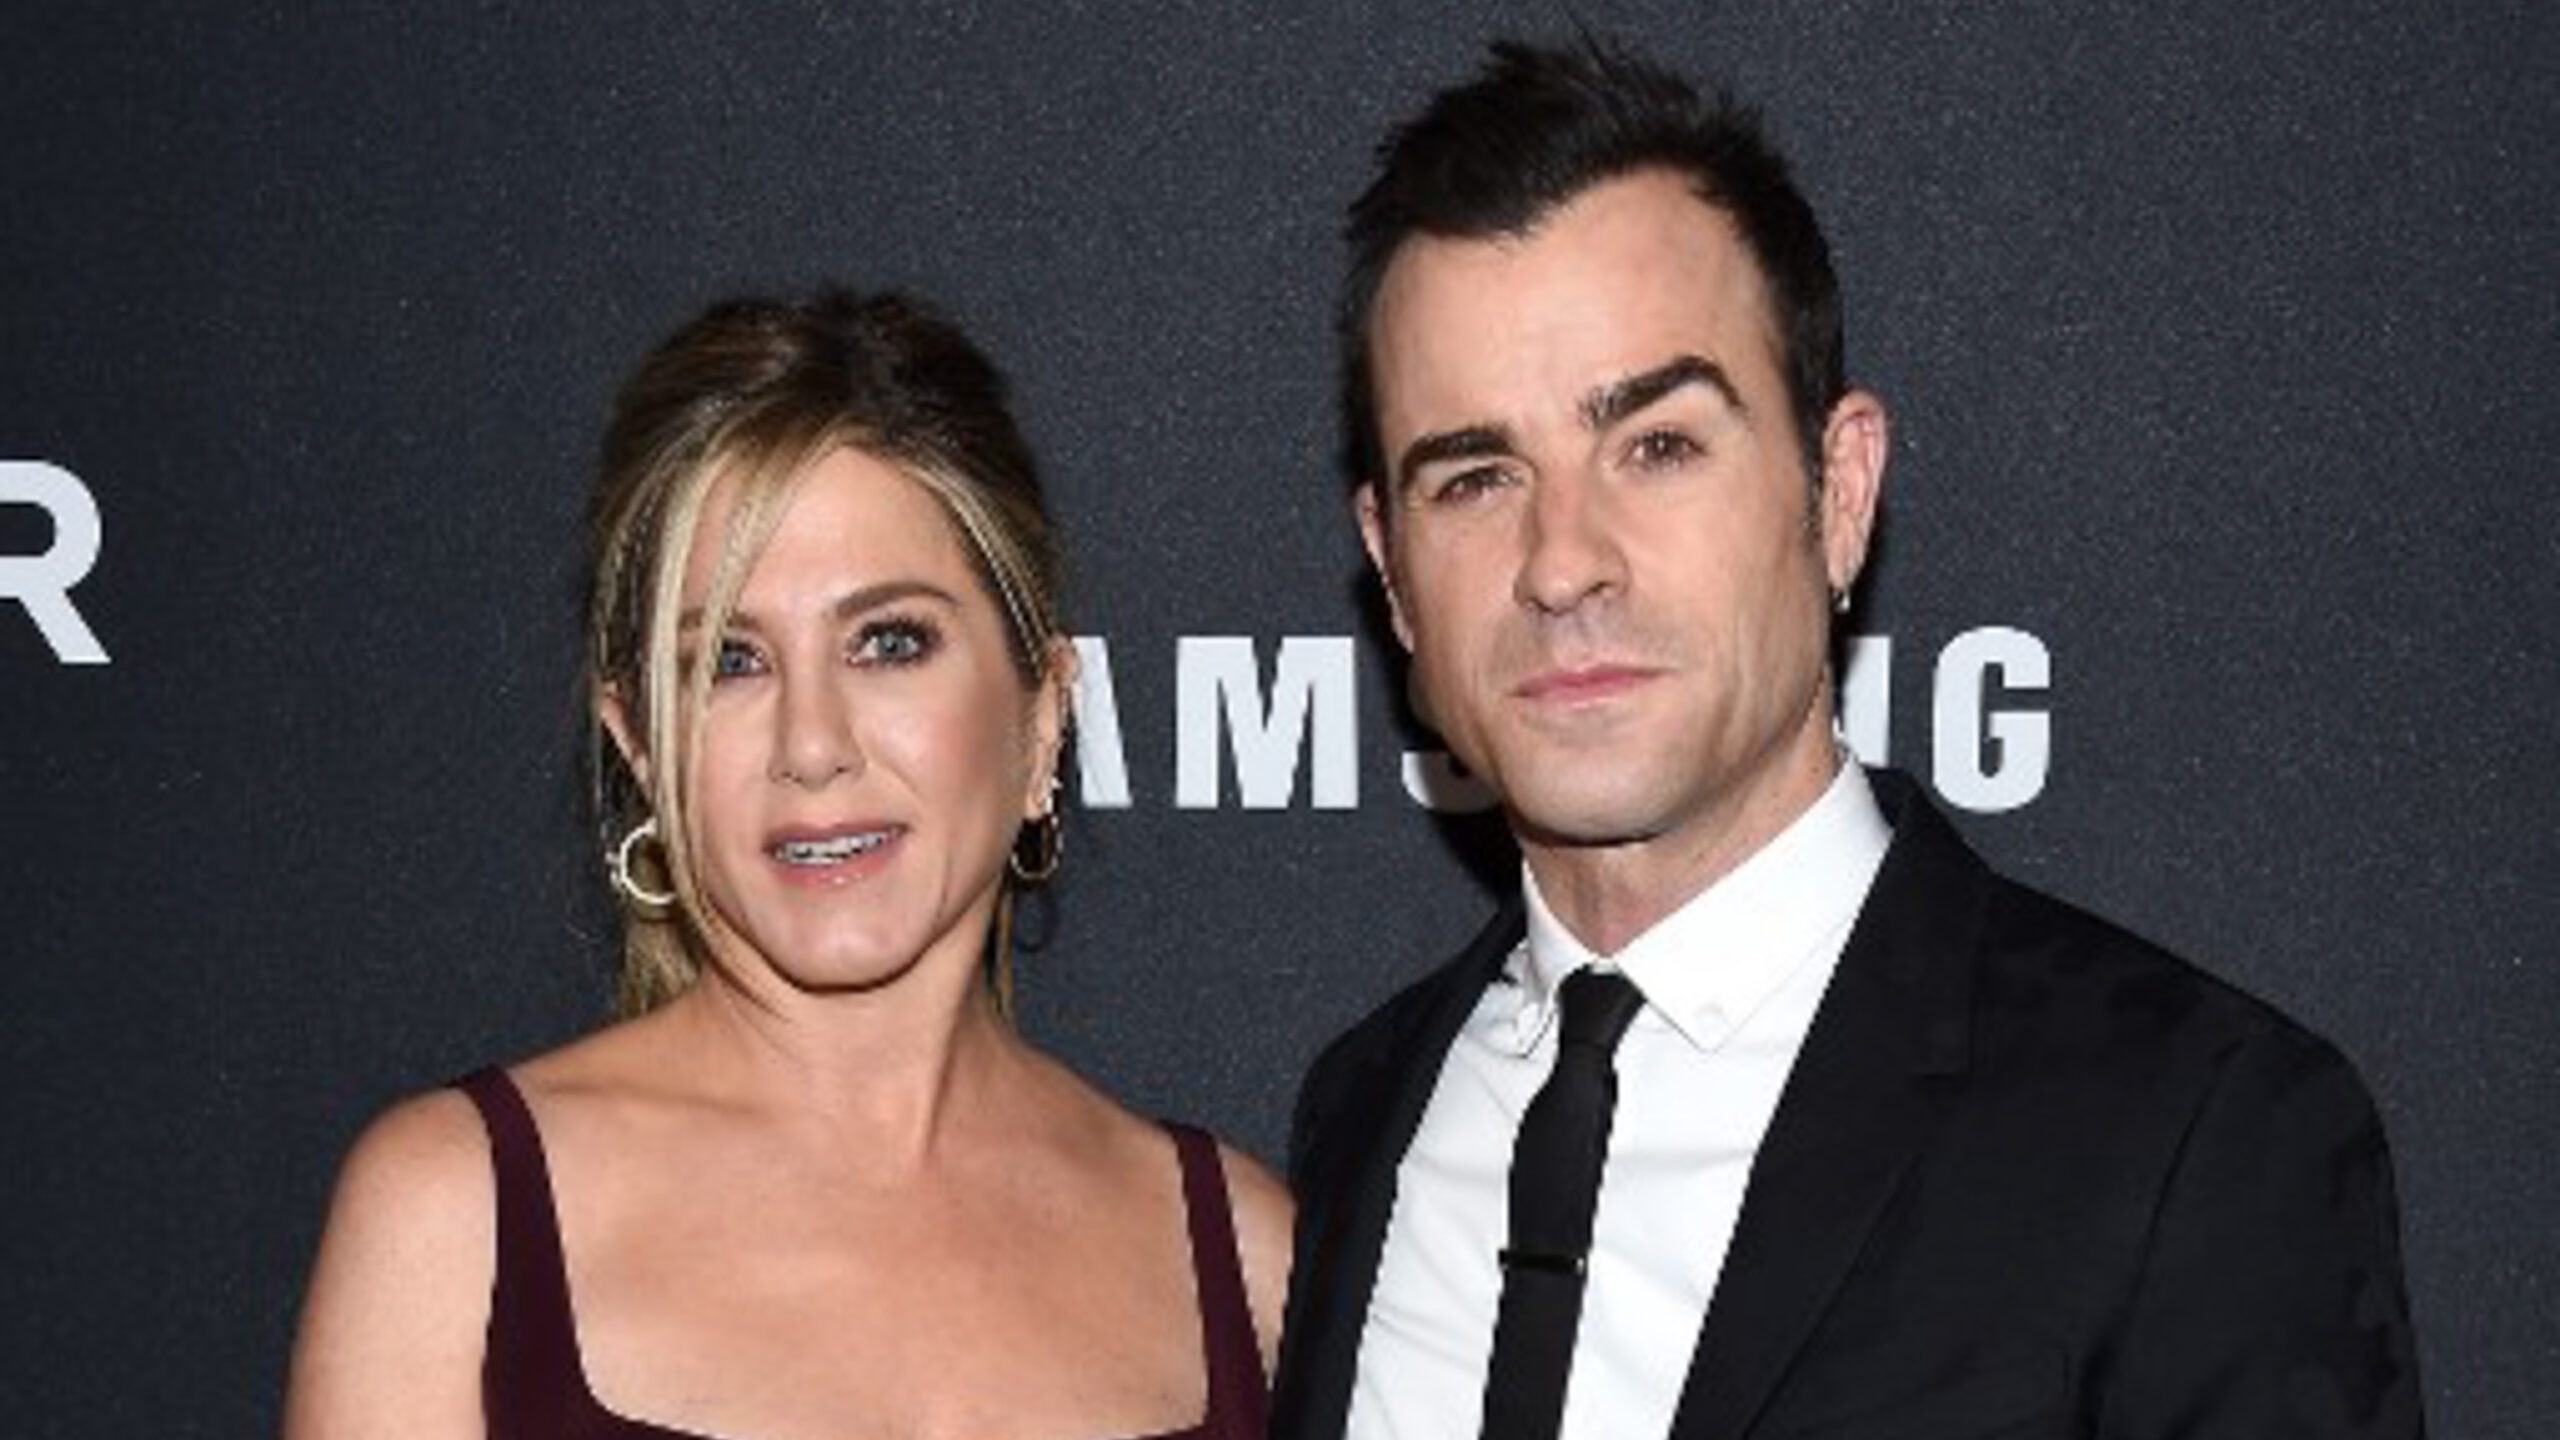 Here’s what Justin Theroux has to say about the Brad Pitt, Angelina Jolie divorce